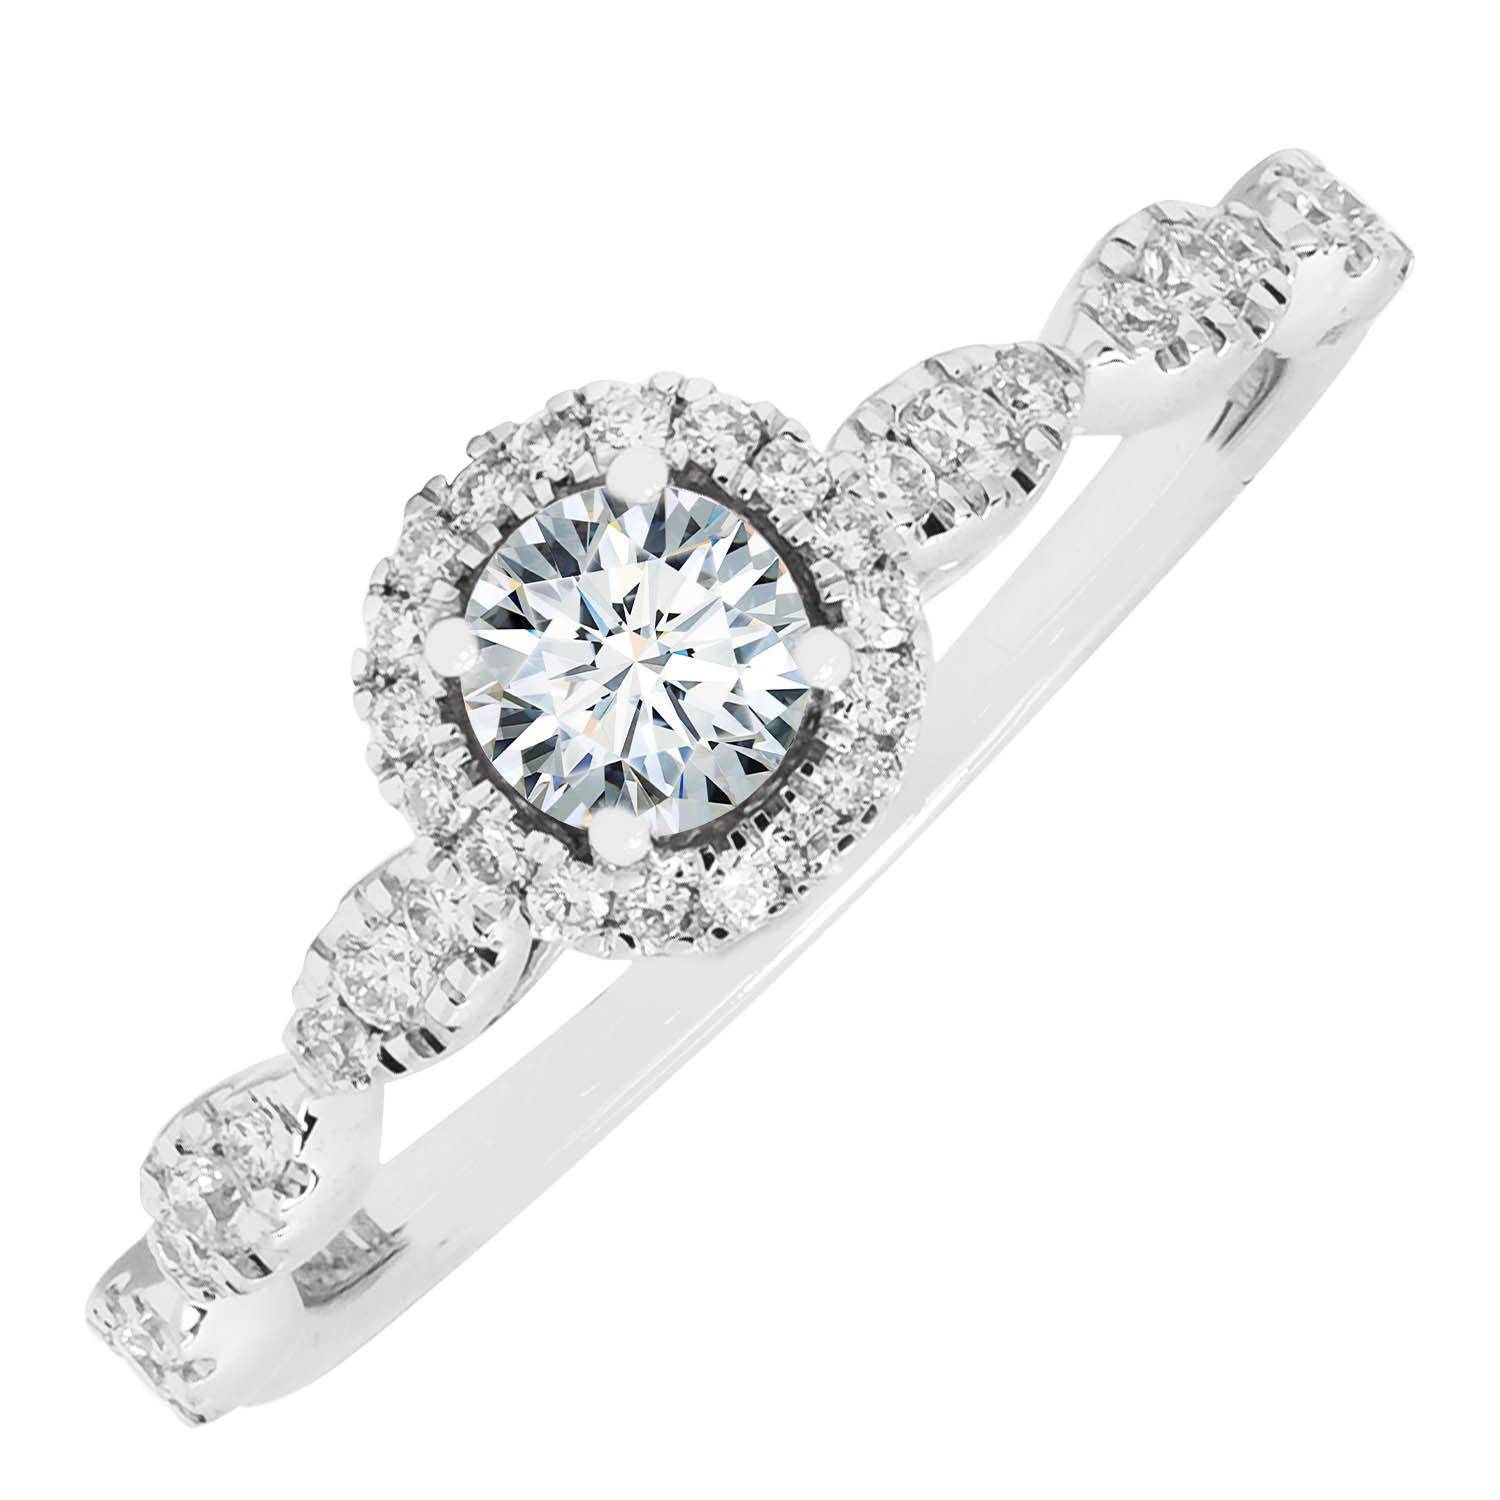 Northern Star Diamond Engagement Ring in 14kt White Gold (1/2ct tw)